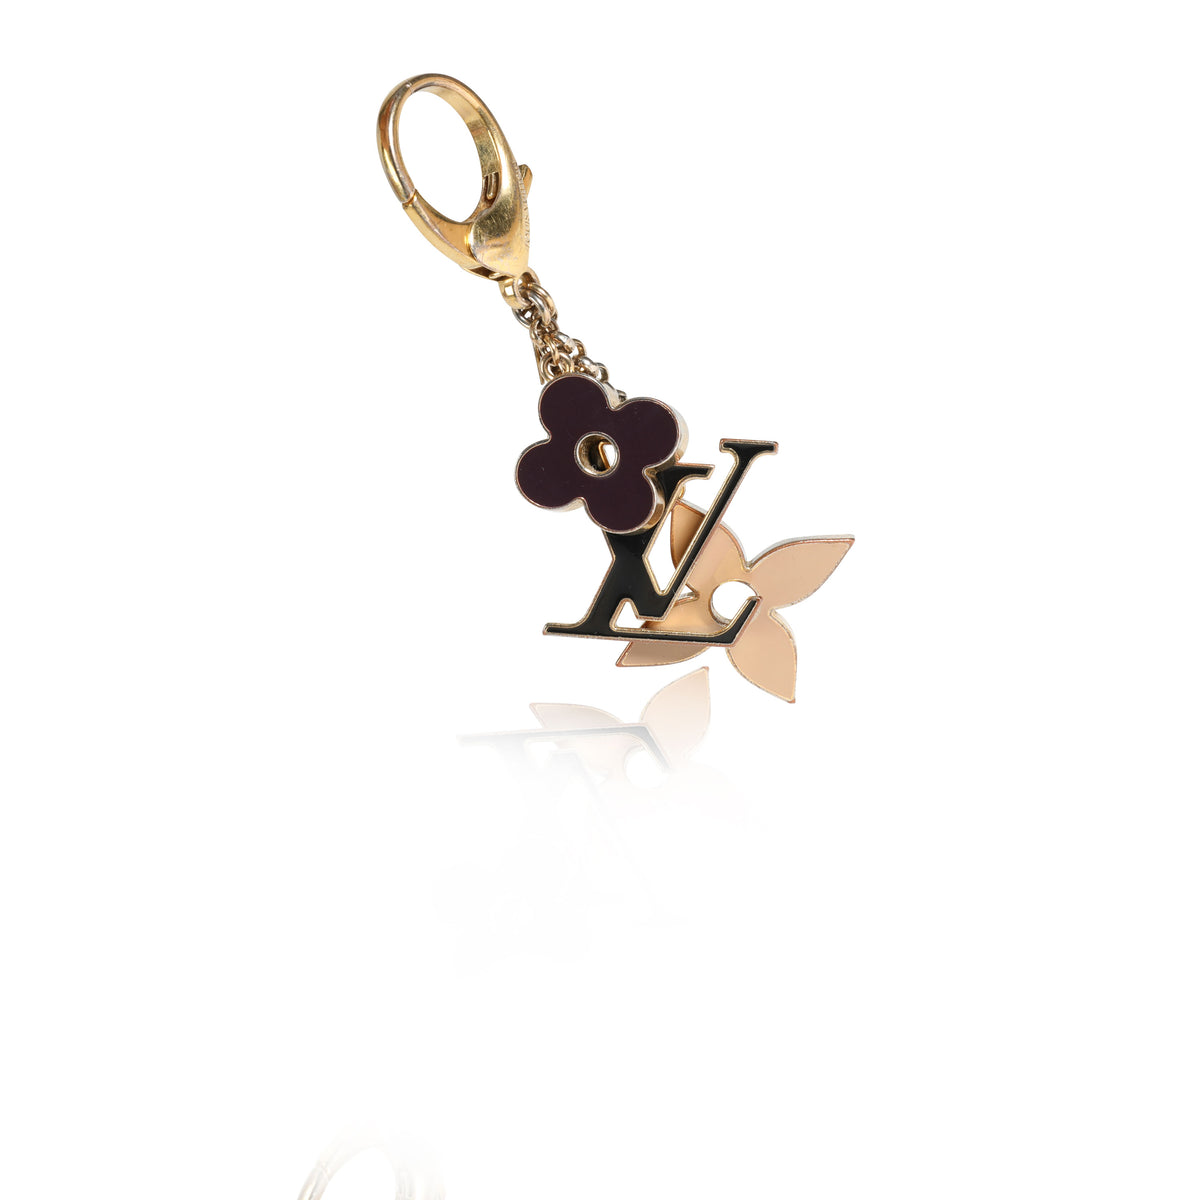 All that glitters 150, gold-colored Louis Vuitton keychain